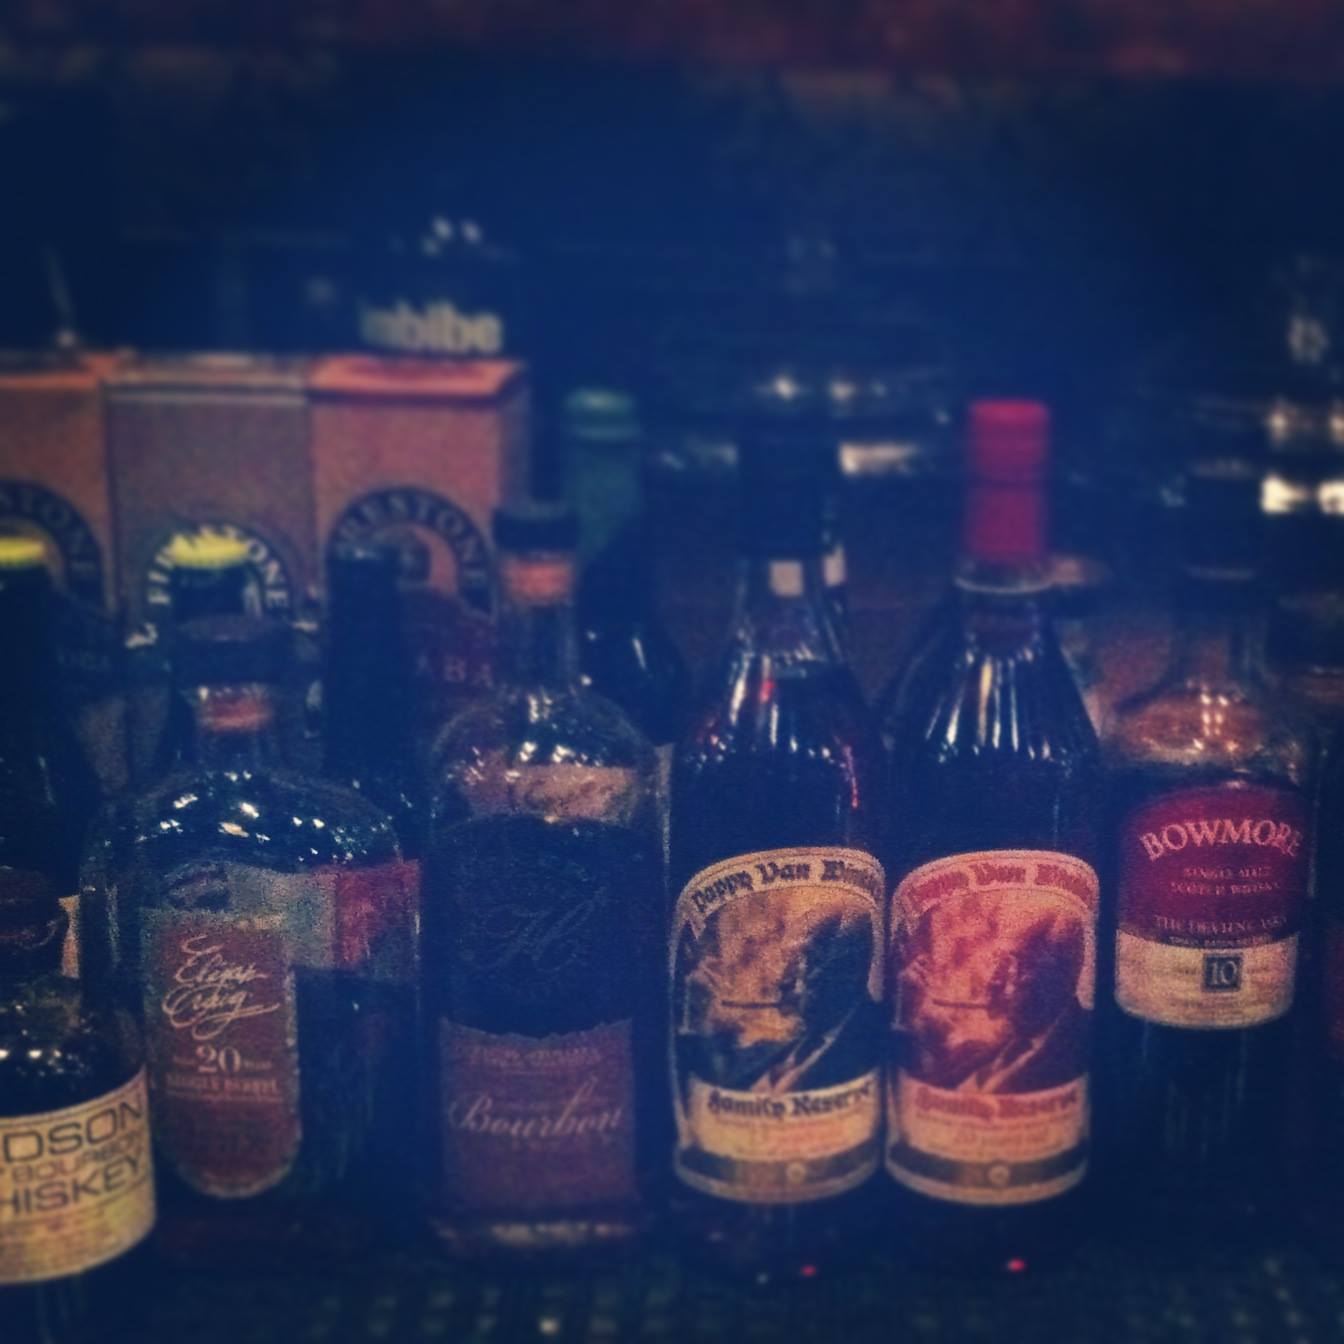 Just a few of our new liquid friends you should come and introduce yourself to